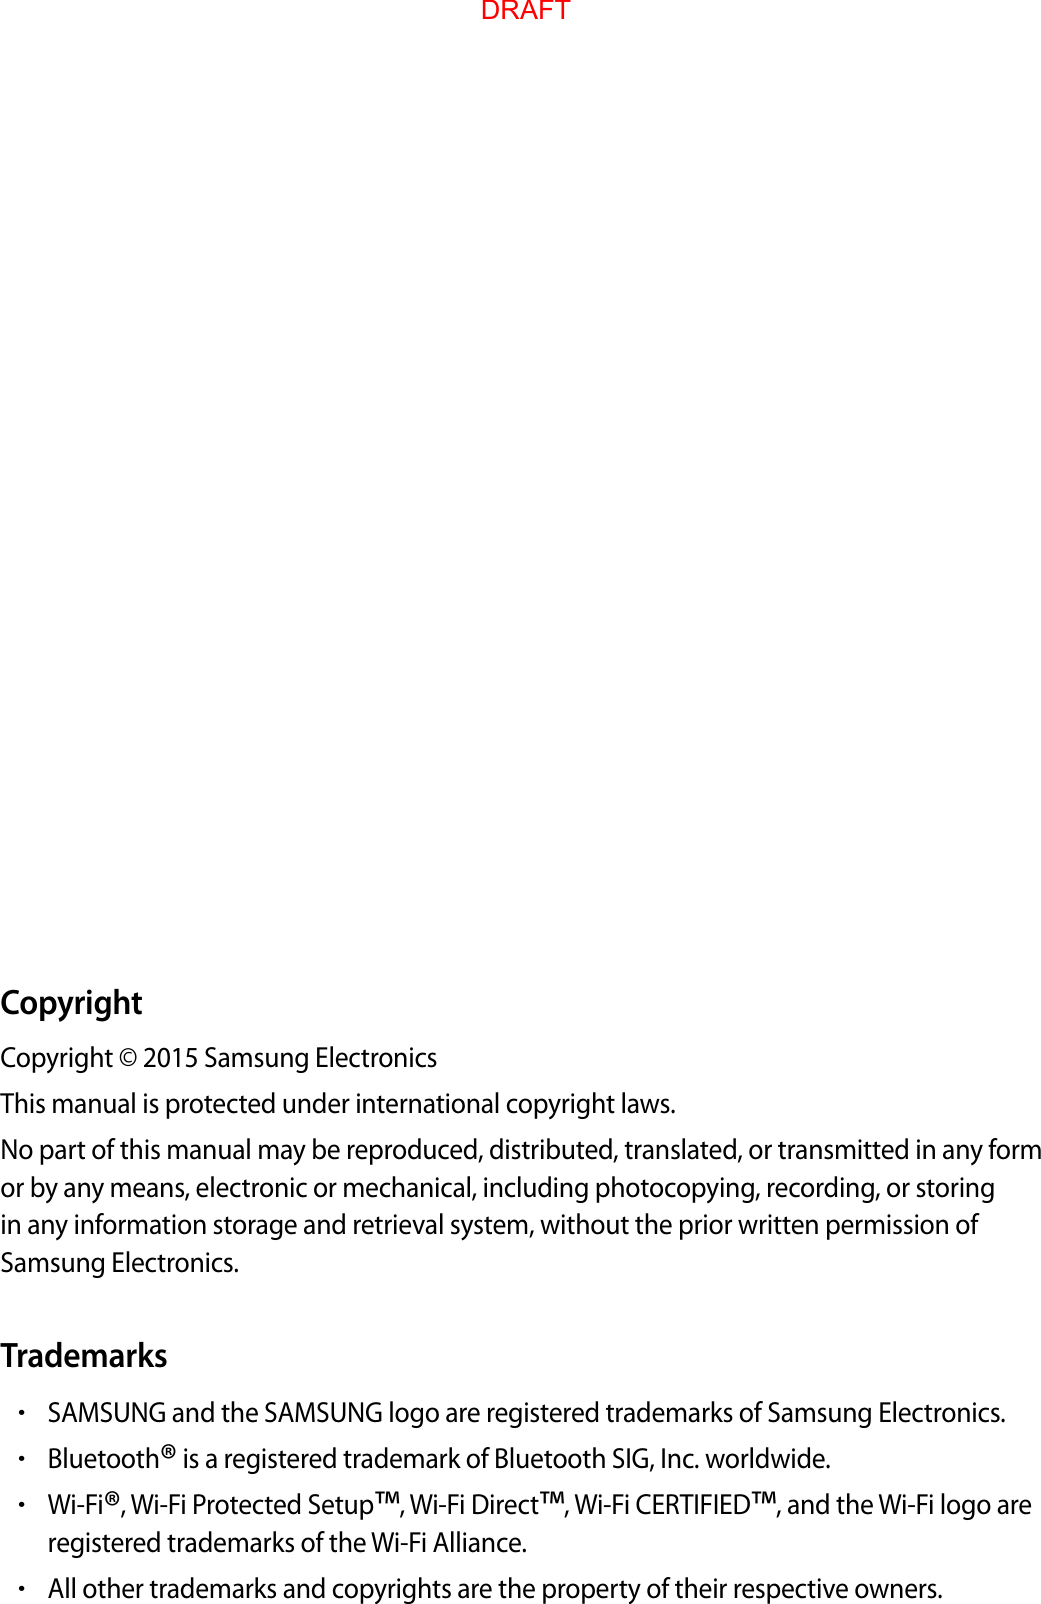 CopyrightCop yright © 2015 Samsung ElectronicsThis manual is prot ected under international c op yright law s .No part of this manual may be r epr oduced , distributed , tr anslat ed , or transmitt ed in an y form or by an y means , electronic or mechanical , including photoc opying, recor ding , or st oring in any inf ormation st orage and r etrieval sy st em, without the prior written permission of Samsung Electronics.Trademarks•SAMSUNG and the SAMSUNG logo ar e r egist er ed trademarks of Samsung Electronics.•Bluetooth® is a regist er ed trademark of Bluet ooth SIG, Inc. w orldwide.•Wi-Fi®, Wi-F i Pr otected Setup™, W i-Fi Dir ect™, W i-Fi CERTIFIED™, and the Wi-Fi logo areregist er ed trademarks of the Wi-Fi Allianc e .•All other trademarks and copyrights ar e the pr operty of their respective o wners .DRAFT